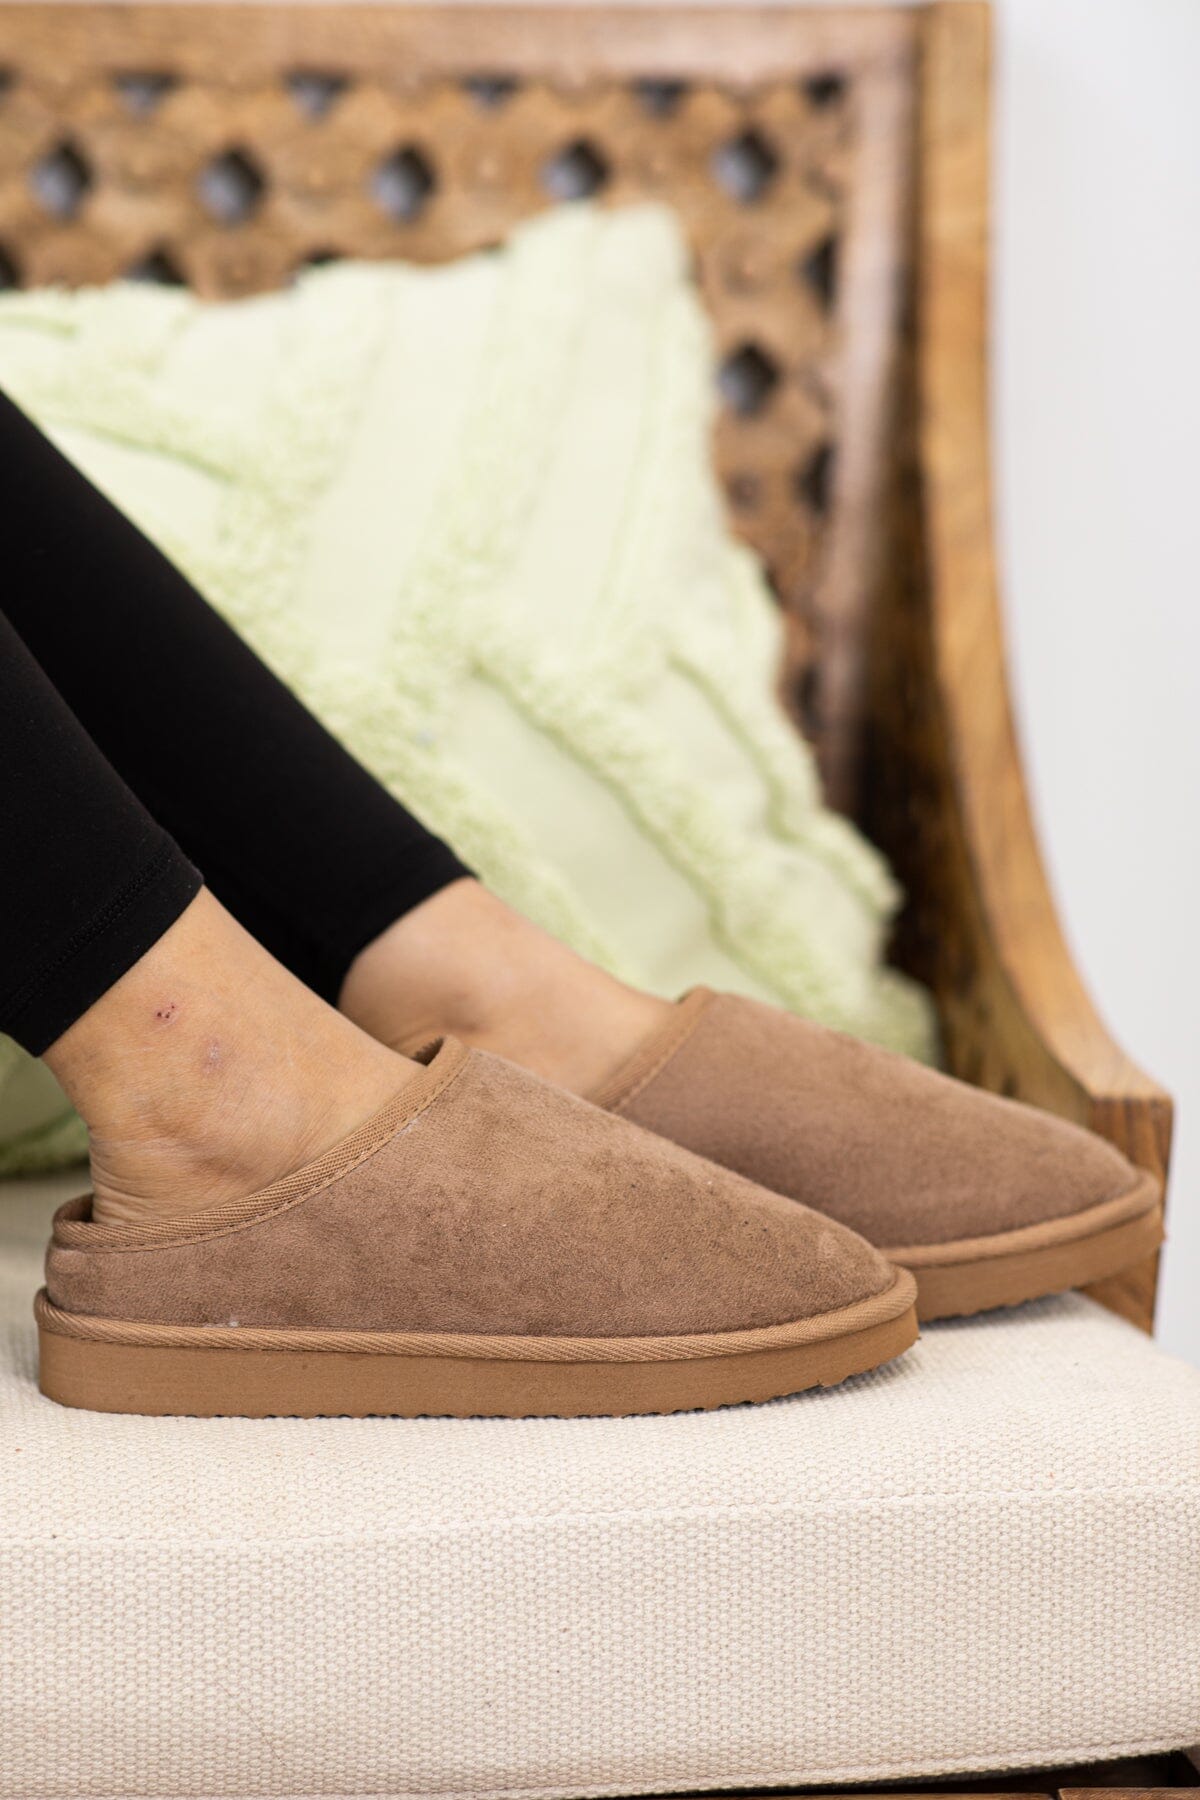 Mocha Faux Fur Lined Slip On Shoes - Filly Flair